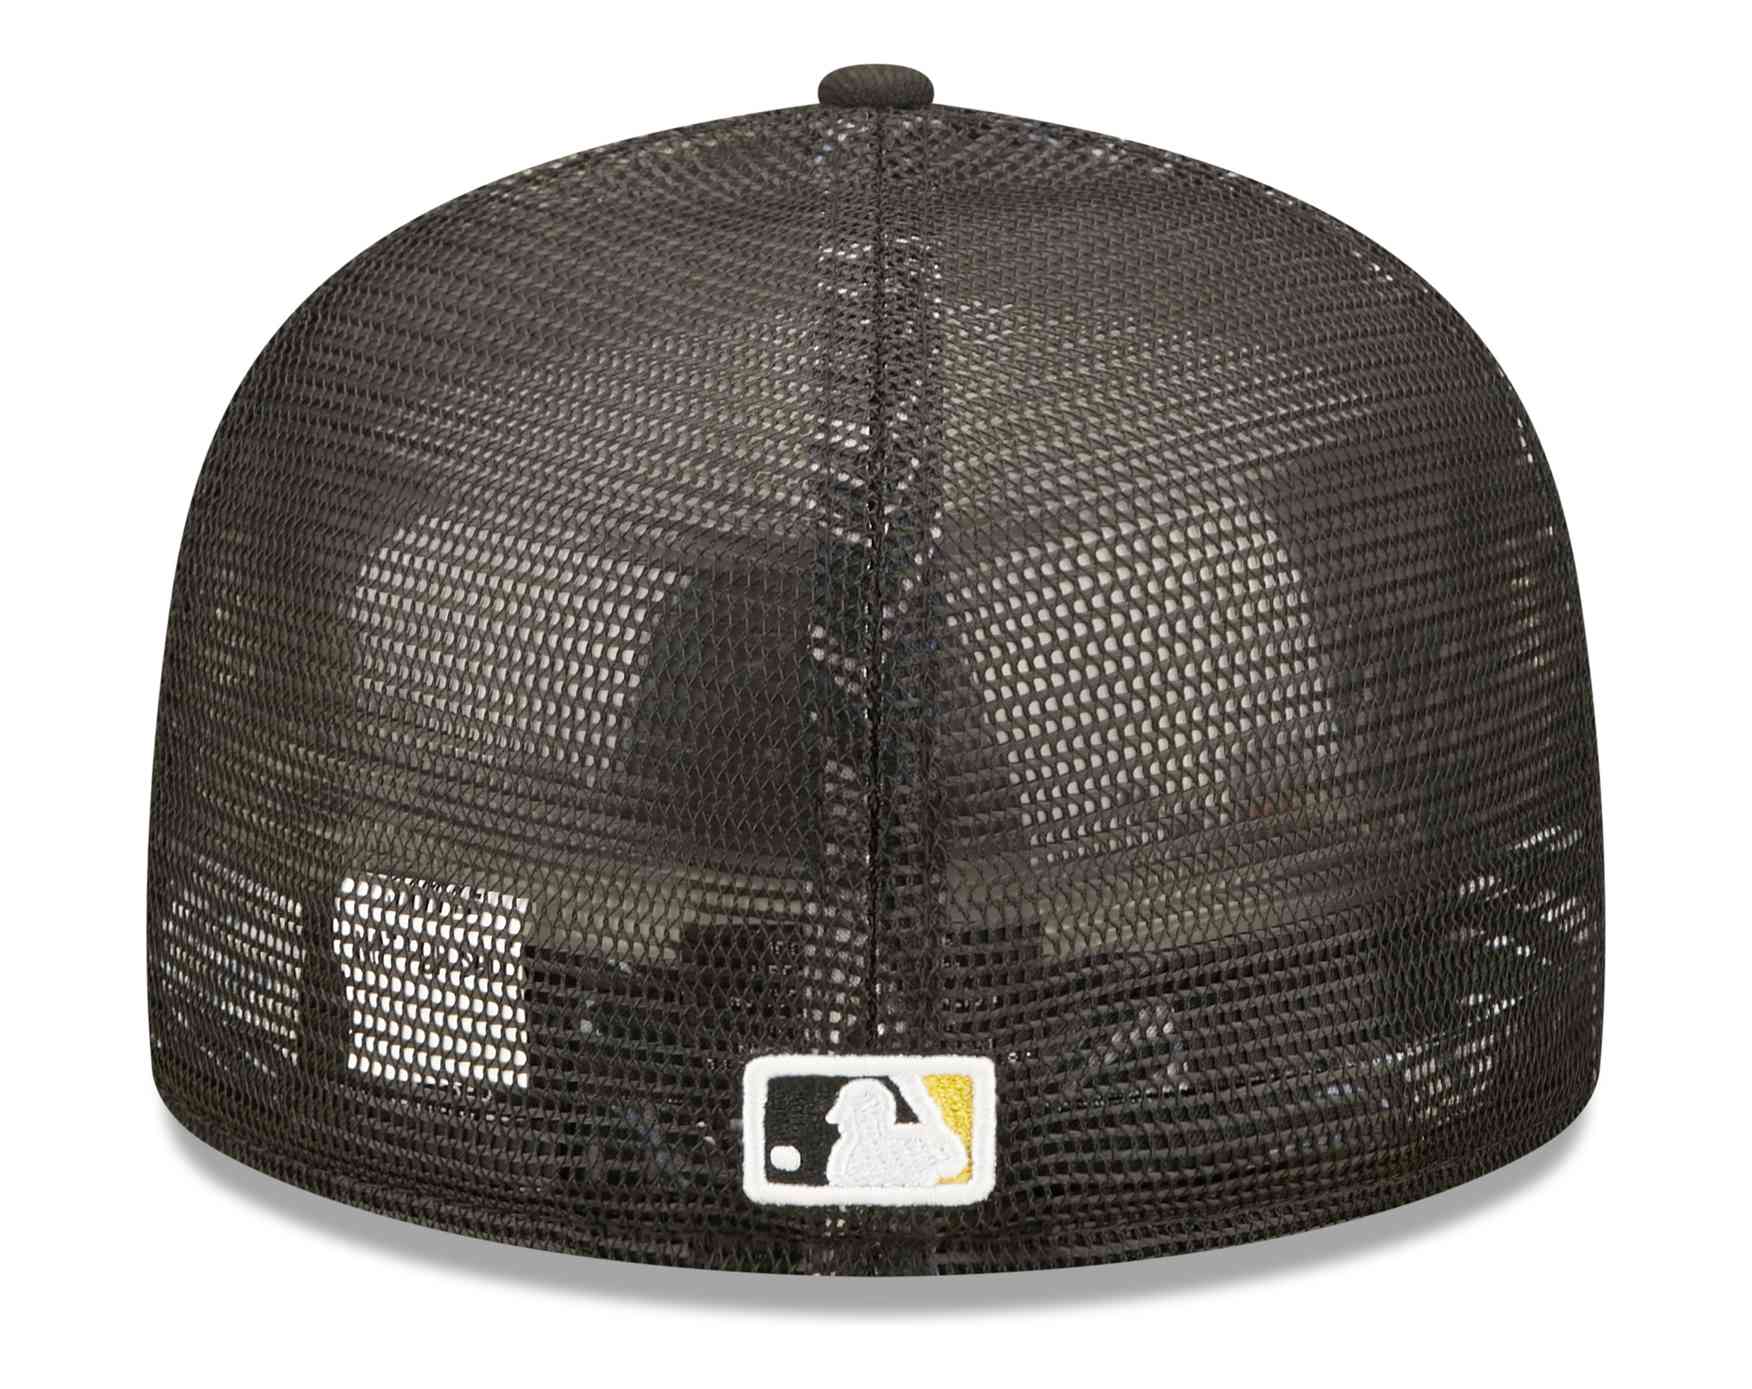 New Era - MLB Pittsburgh Pirates 2022 All Star Game Workout 59Fifty Fitted Cap